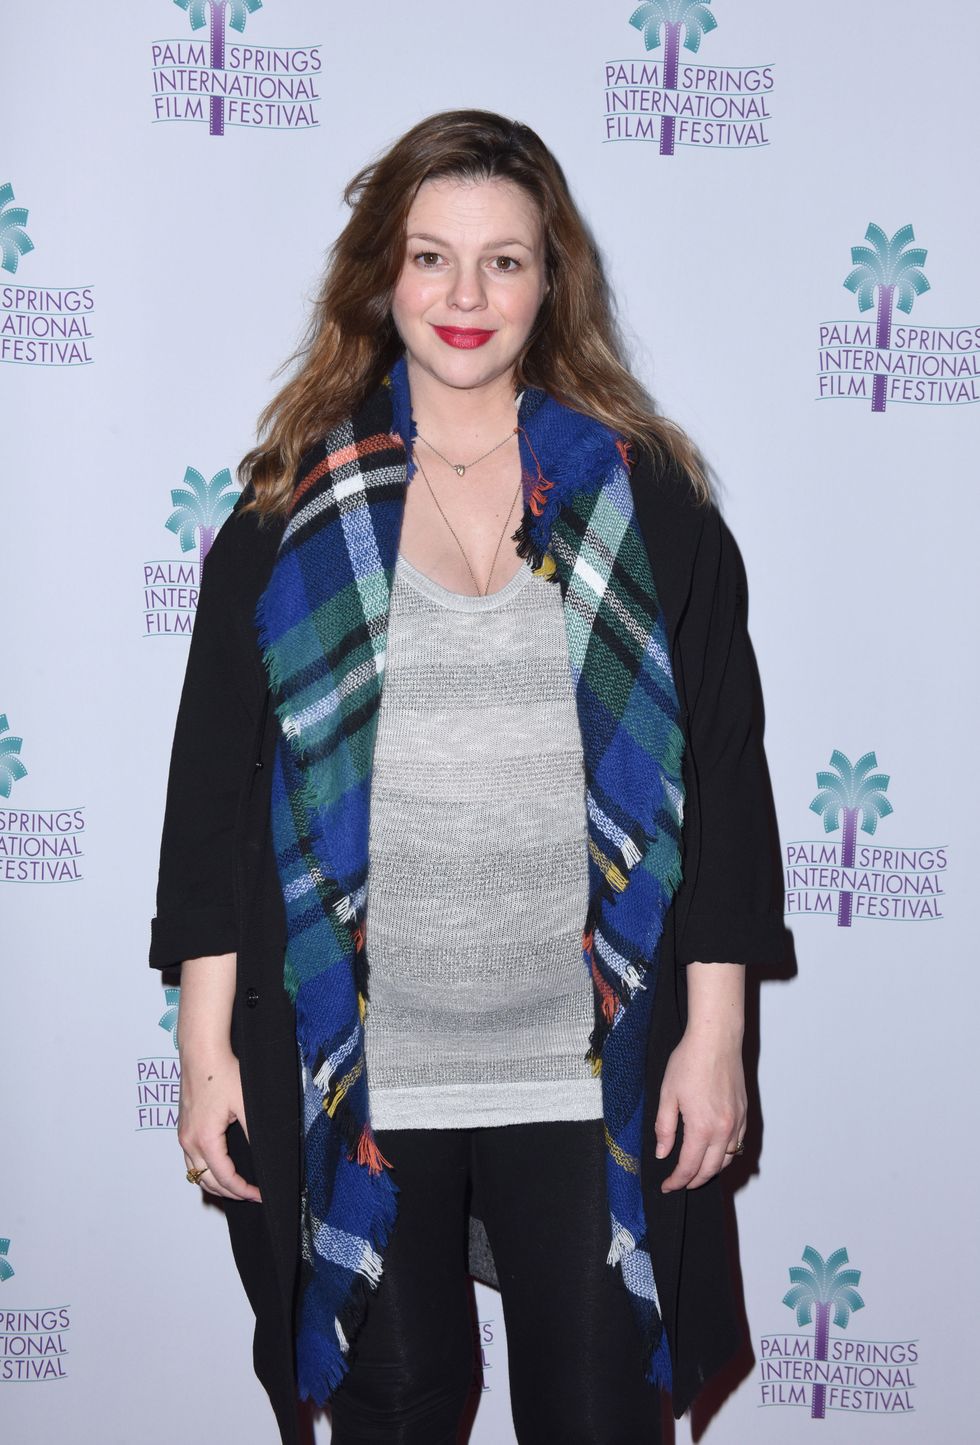 <p><em data-redactor-tag="em" data-verified="redactor"></em><em data-redactor-tag="em" data-verified="redactor">Sisterhood of the Traveling Pants</em> star Amber Tamblyn is expecting her first child with David Cross, and announced the news in an essay about Hillary Clinton and motherhood. "Motherhood has been heavily on my mind because I am going to be a mother soon. I'm pregnant, with a daughter on the way," she&nbsp;<a href="http://www.glamour.com/story/the-frame-holds-the-big-picture-how-mothers-and-daughters-can-change-the-way-we-talk-about-being-women" target="_blank" data-saferedirecturl="https://www.google.com/url?hl=en&amp;q=http://www.glamour.com/story/the-frame-holds-the-big-picture-how-mothers-and-daughters-can-change-the-way-we-talk-about-being-women&amp;source=gmail&amp;ust=1485274622540000&amp;usg=AFQjCNFCpO87gDLKBzLF2B2pEXpZ33Szew">said</a>. "I think constantly about the world I am bringing her into. How much do I have to do, as a daughter and a soon-to-be mother, to change not just the conversation about how women are seen, but the language and conversations are spoken in?"</p>